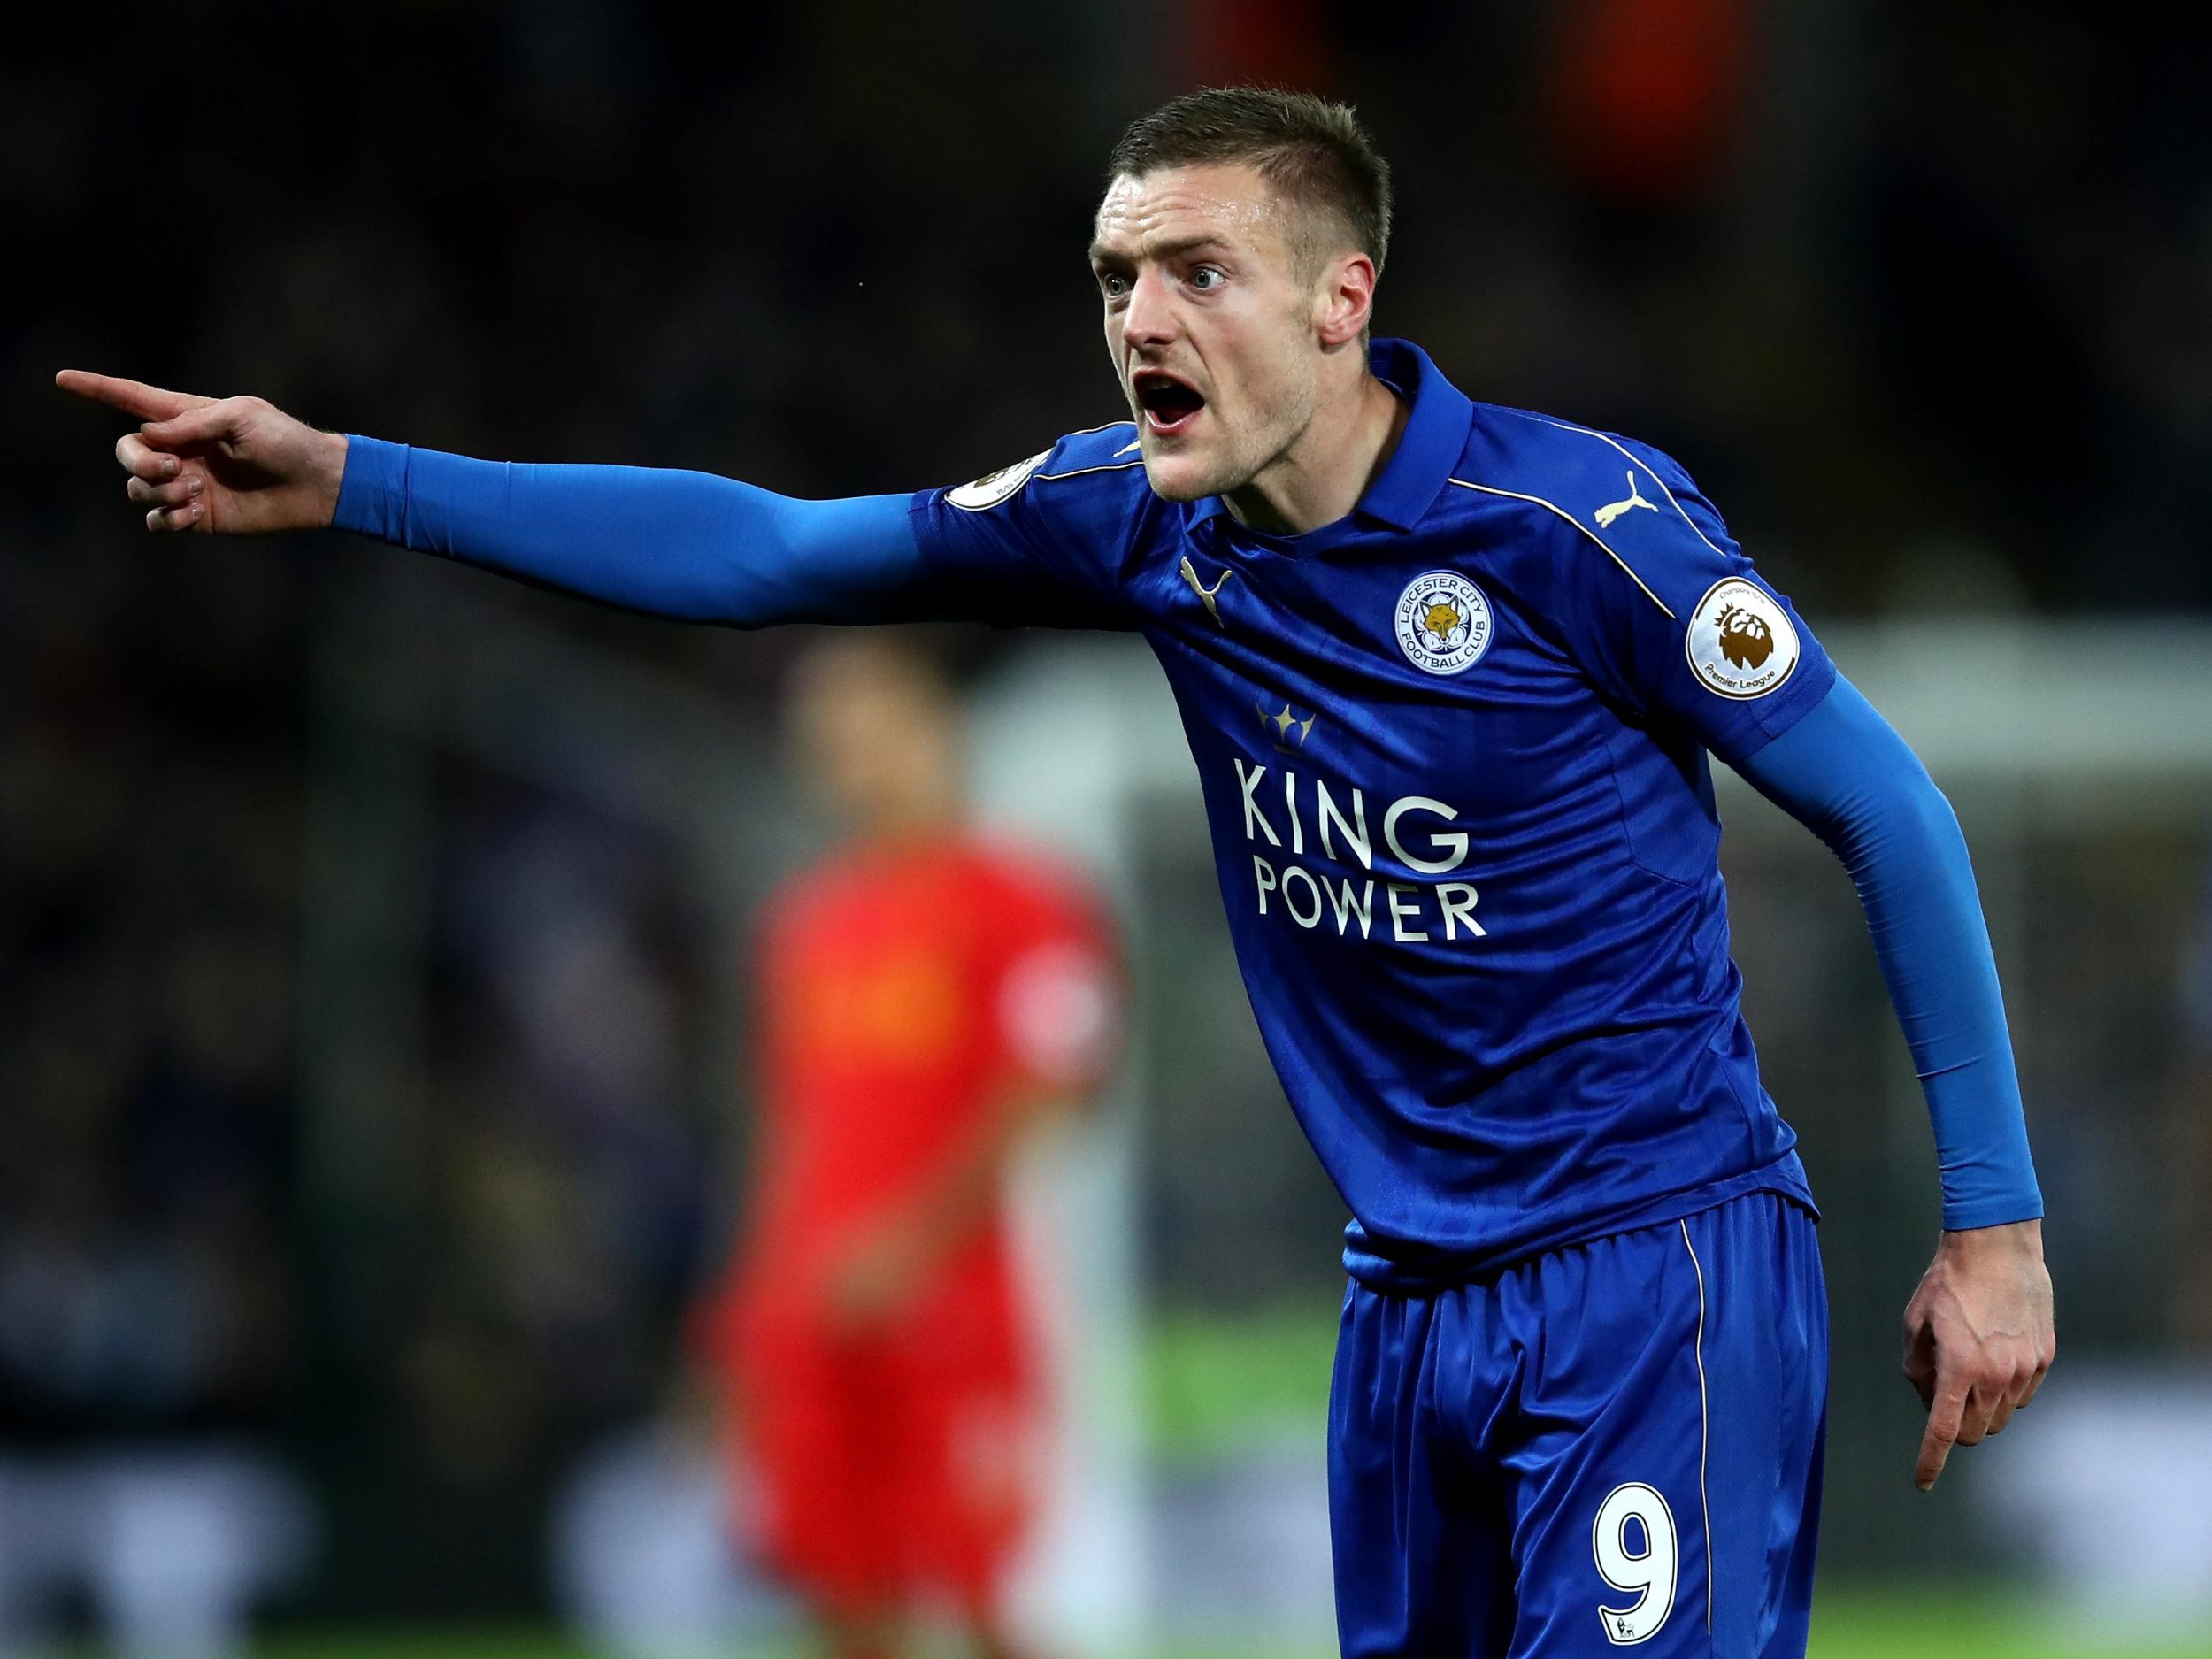 Vardy snapped back at those who have been criticising Leicester